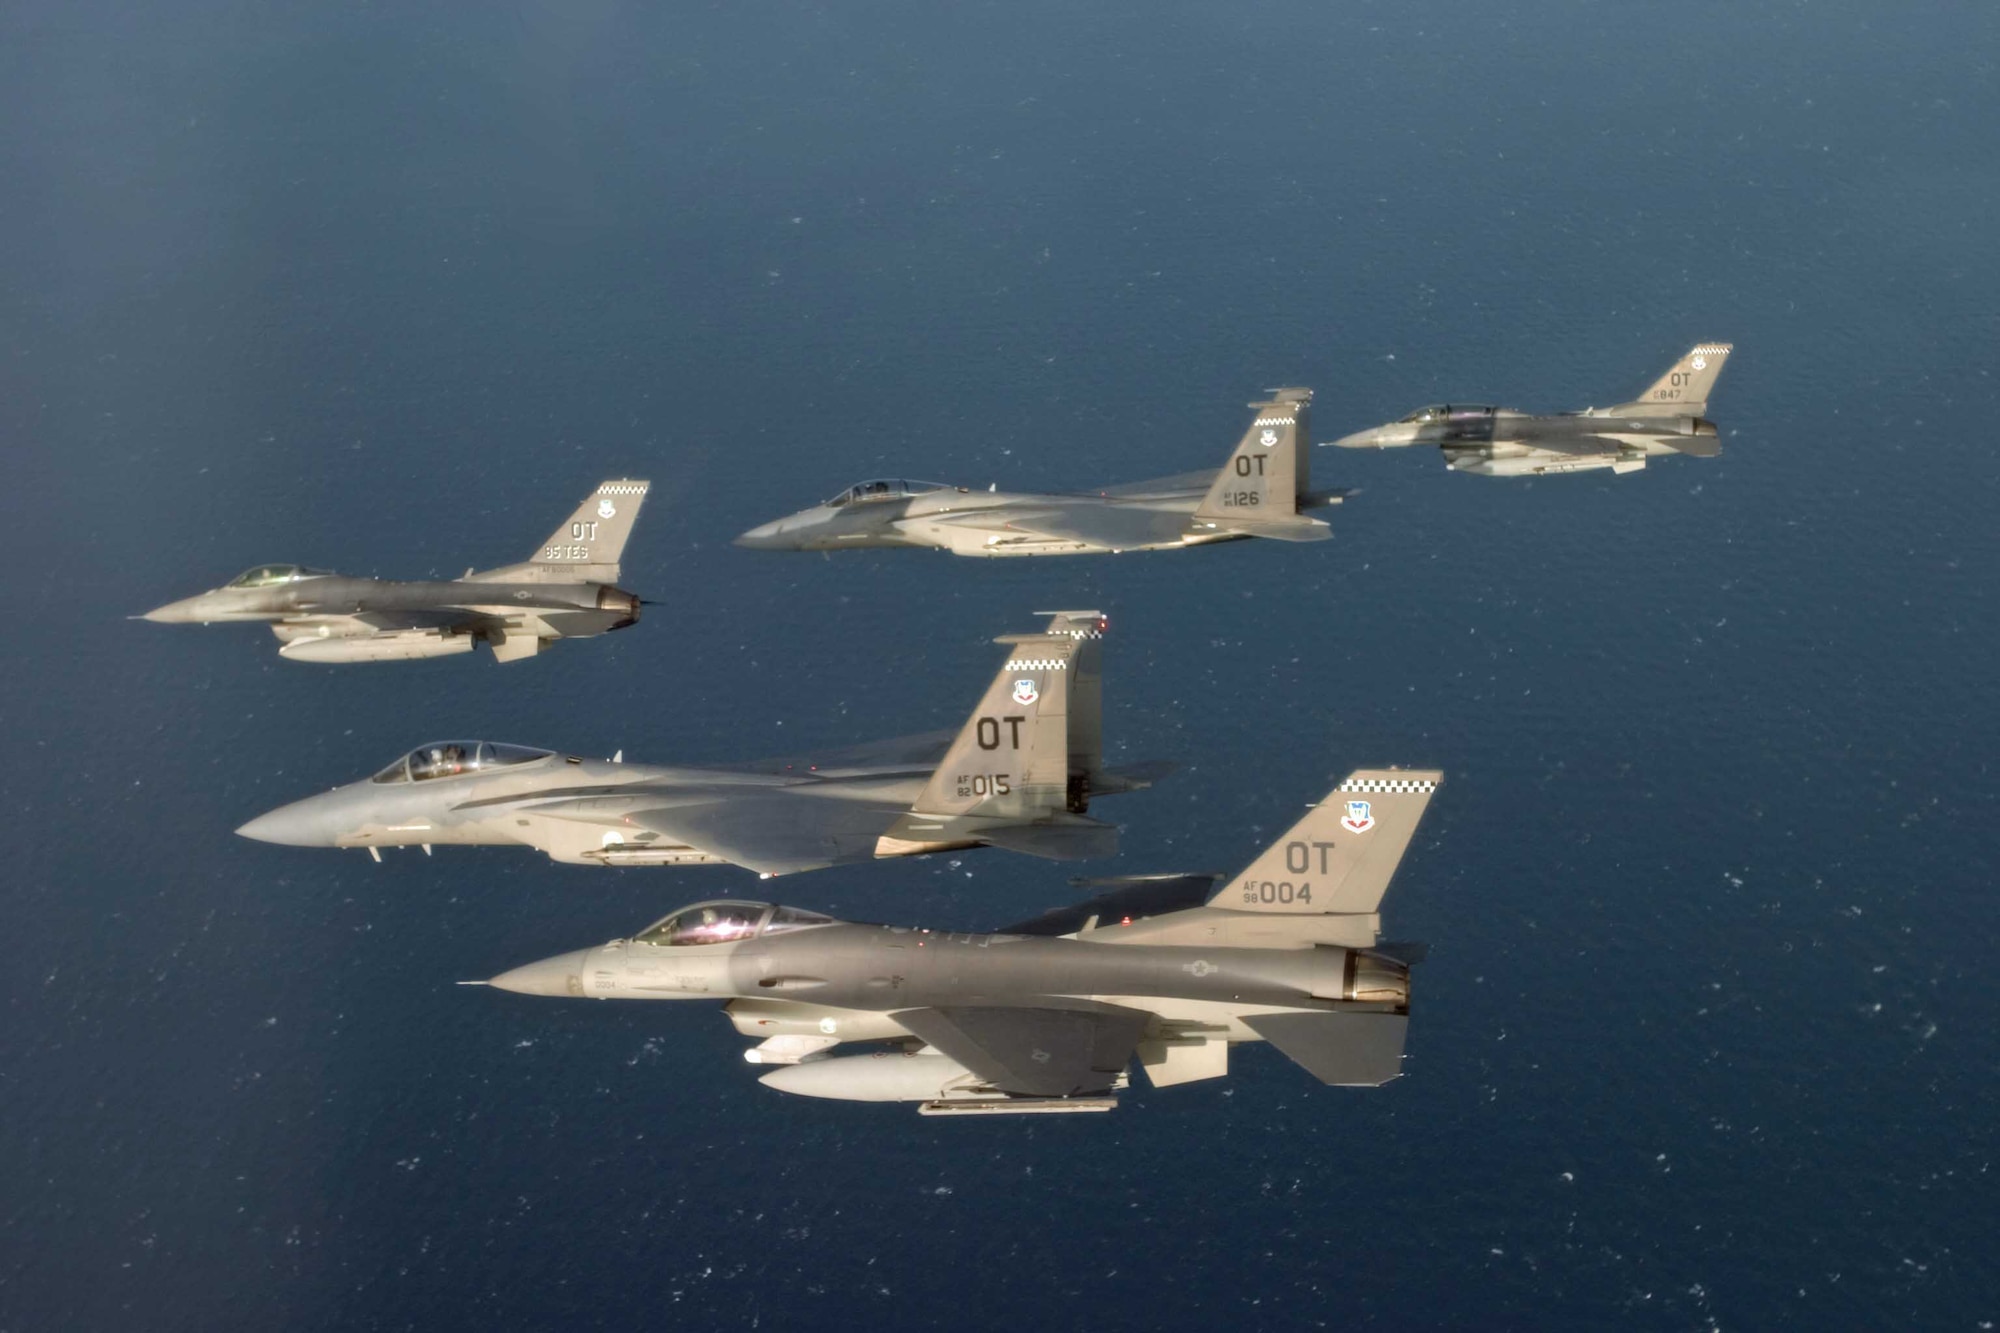 EGLIN AIR FORCE BASE, Fla. - Aircraft of the 85th Test and Evaluation Squadron fly over the Gulf of Mexico. The test squadron flies the F-15C Eagle, F-15E Strike Eagle and F-16 Viper aircraft. (Jake Melampy/Courtesy photo)